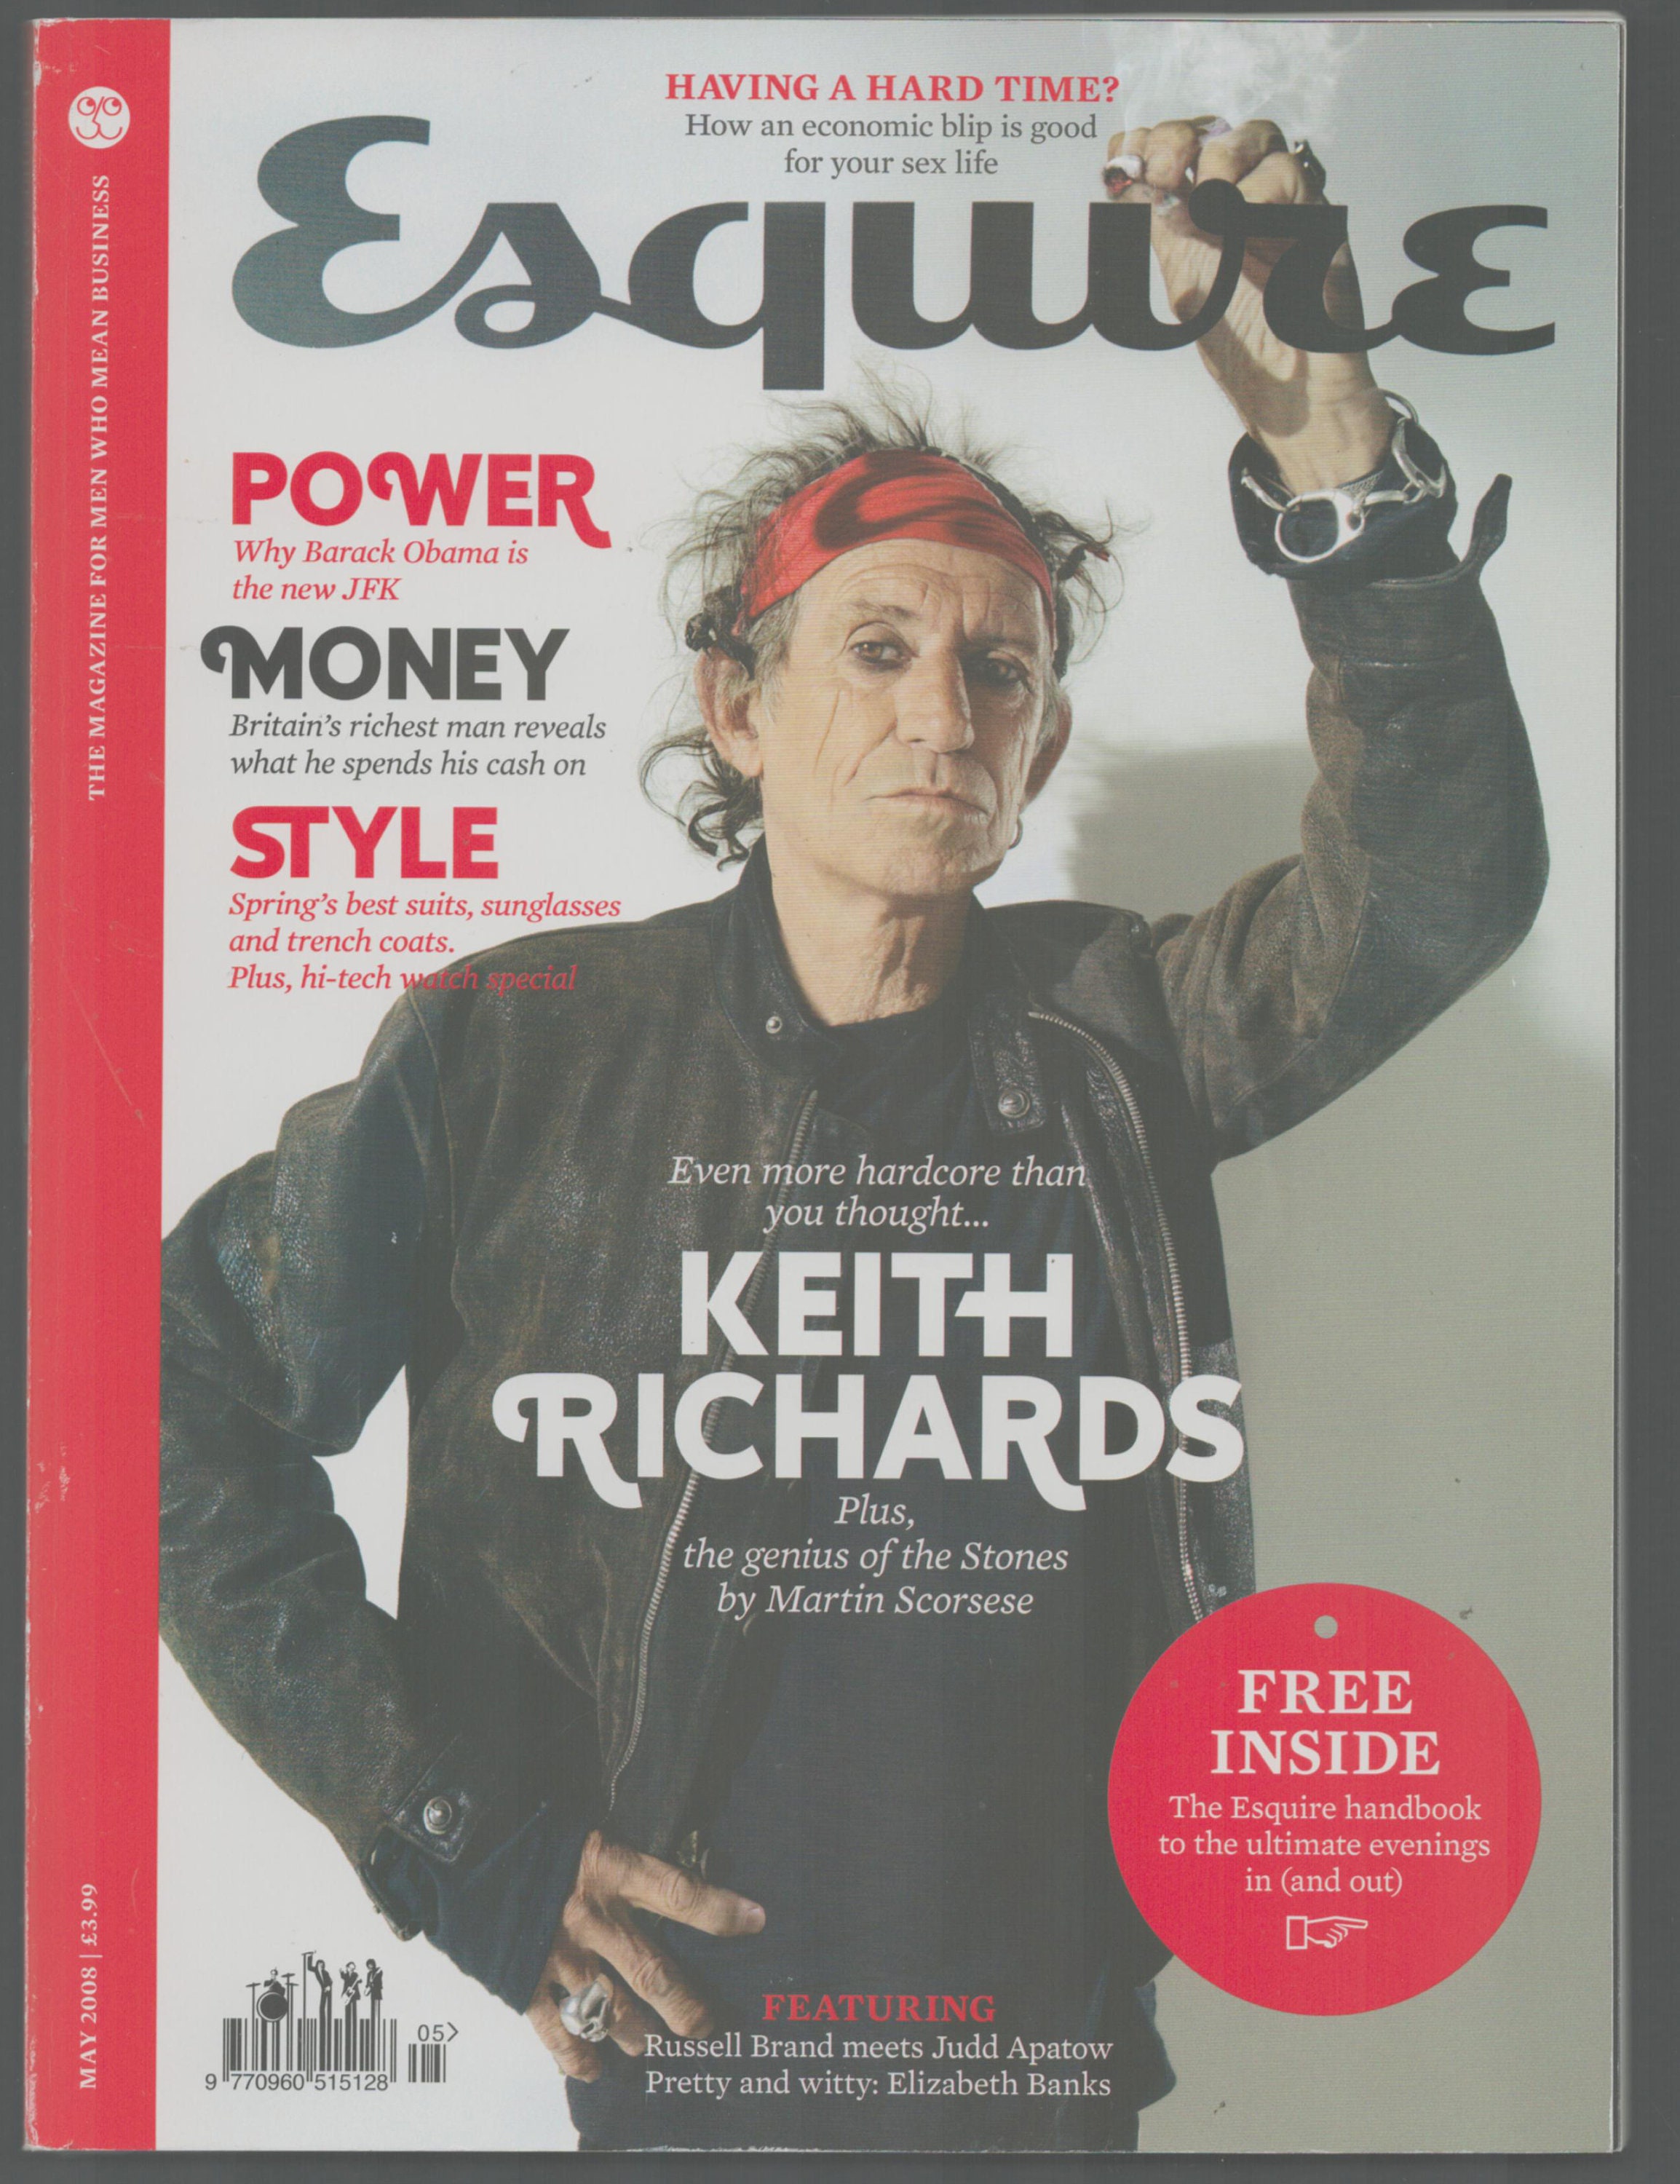 Off-Brand Things Sold at the Vuitton Store: Keith Richards' Book